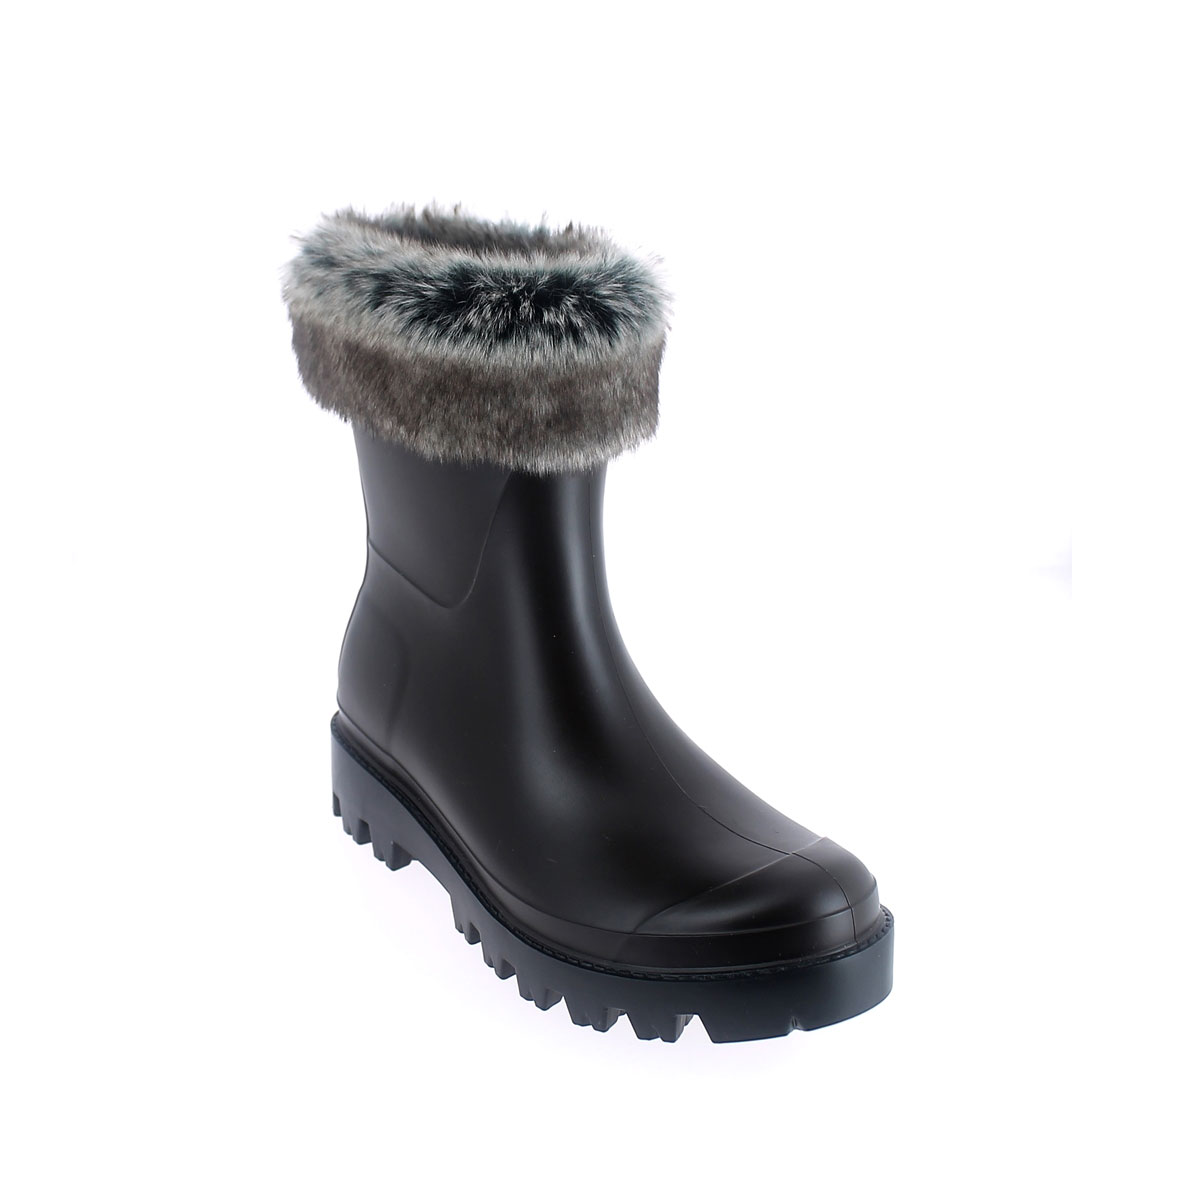 Wellington low boot in Testa di moro pvc with inner lining and cuff